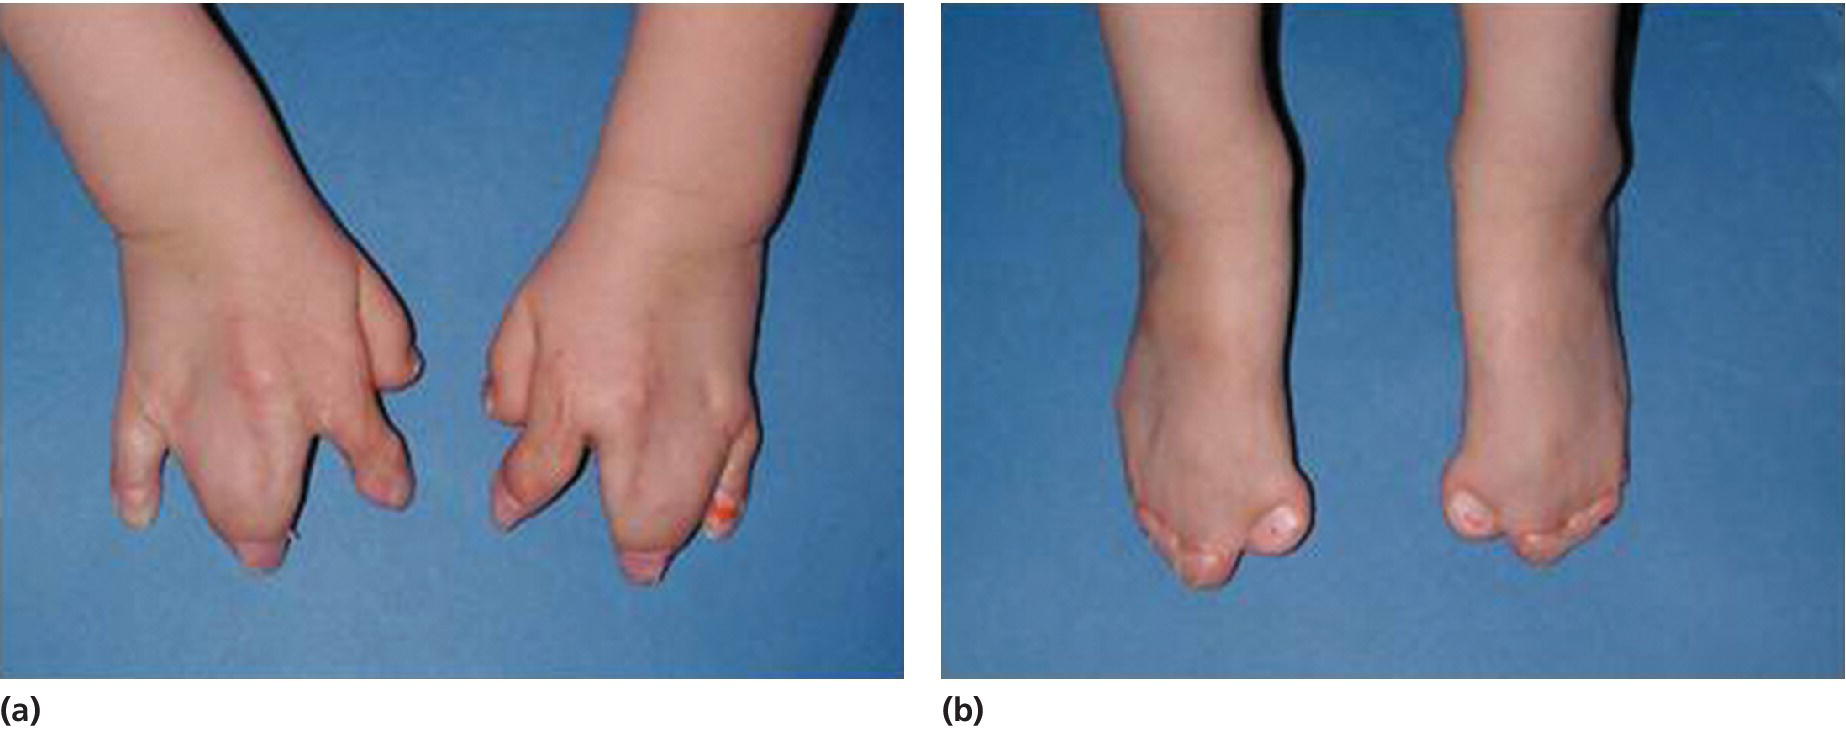 Two photos displays symmetrical syndactyly of hands (left) and feet (right) in a 5-year-old girl with Apert syndrome.